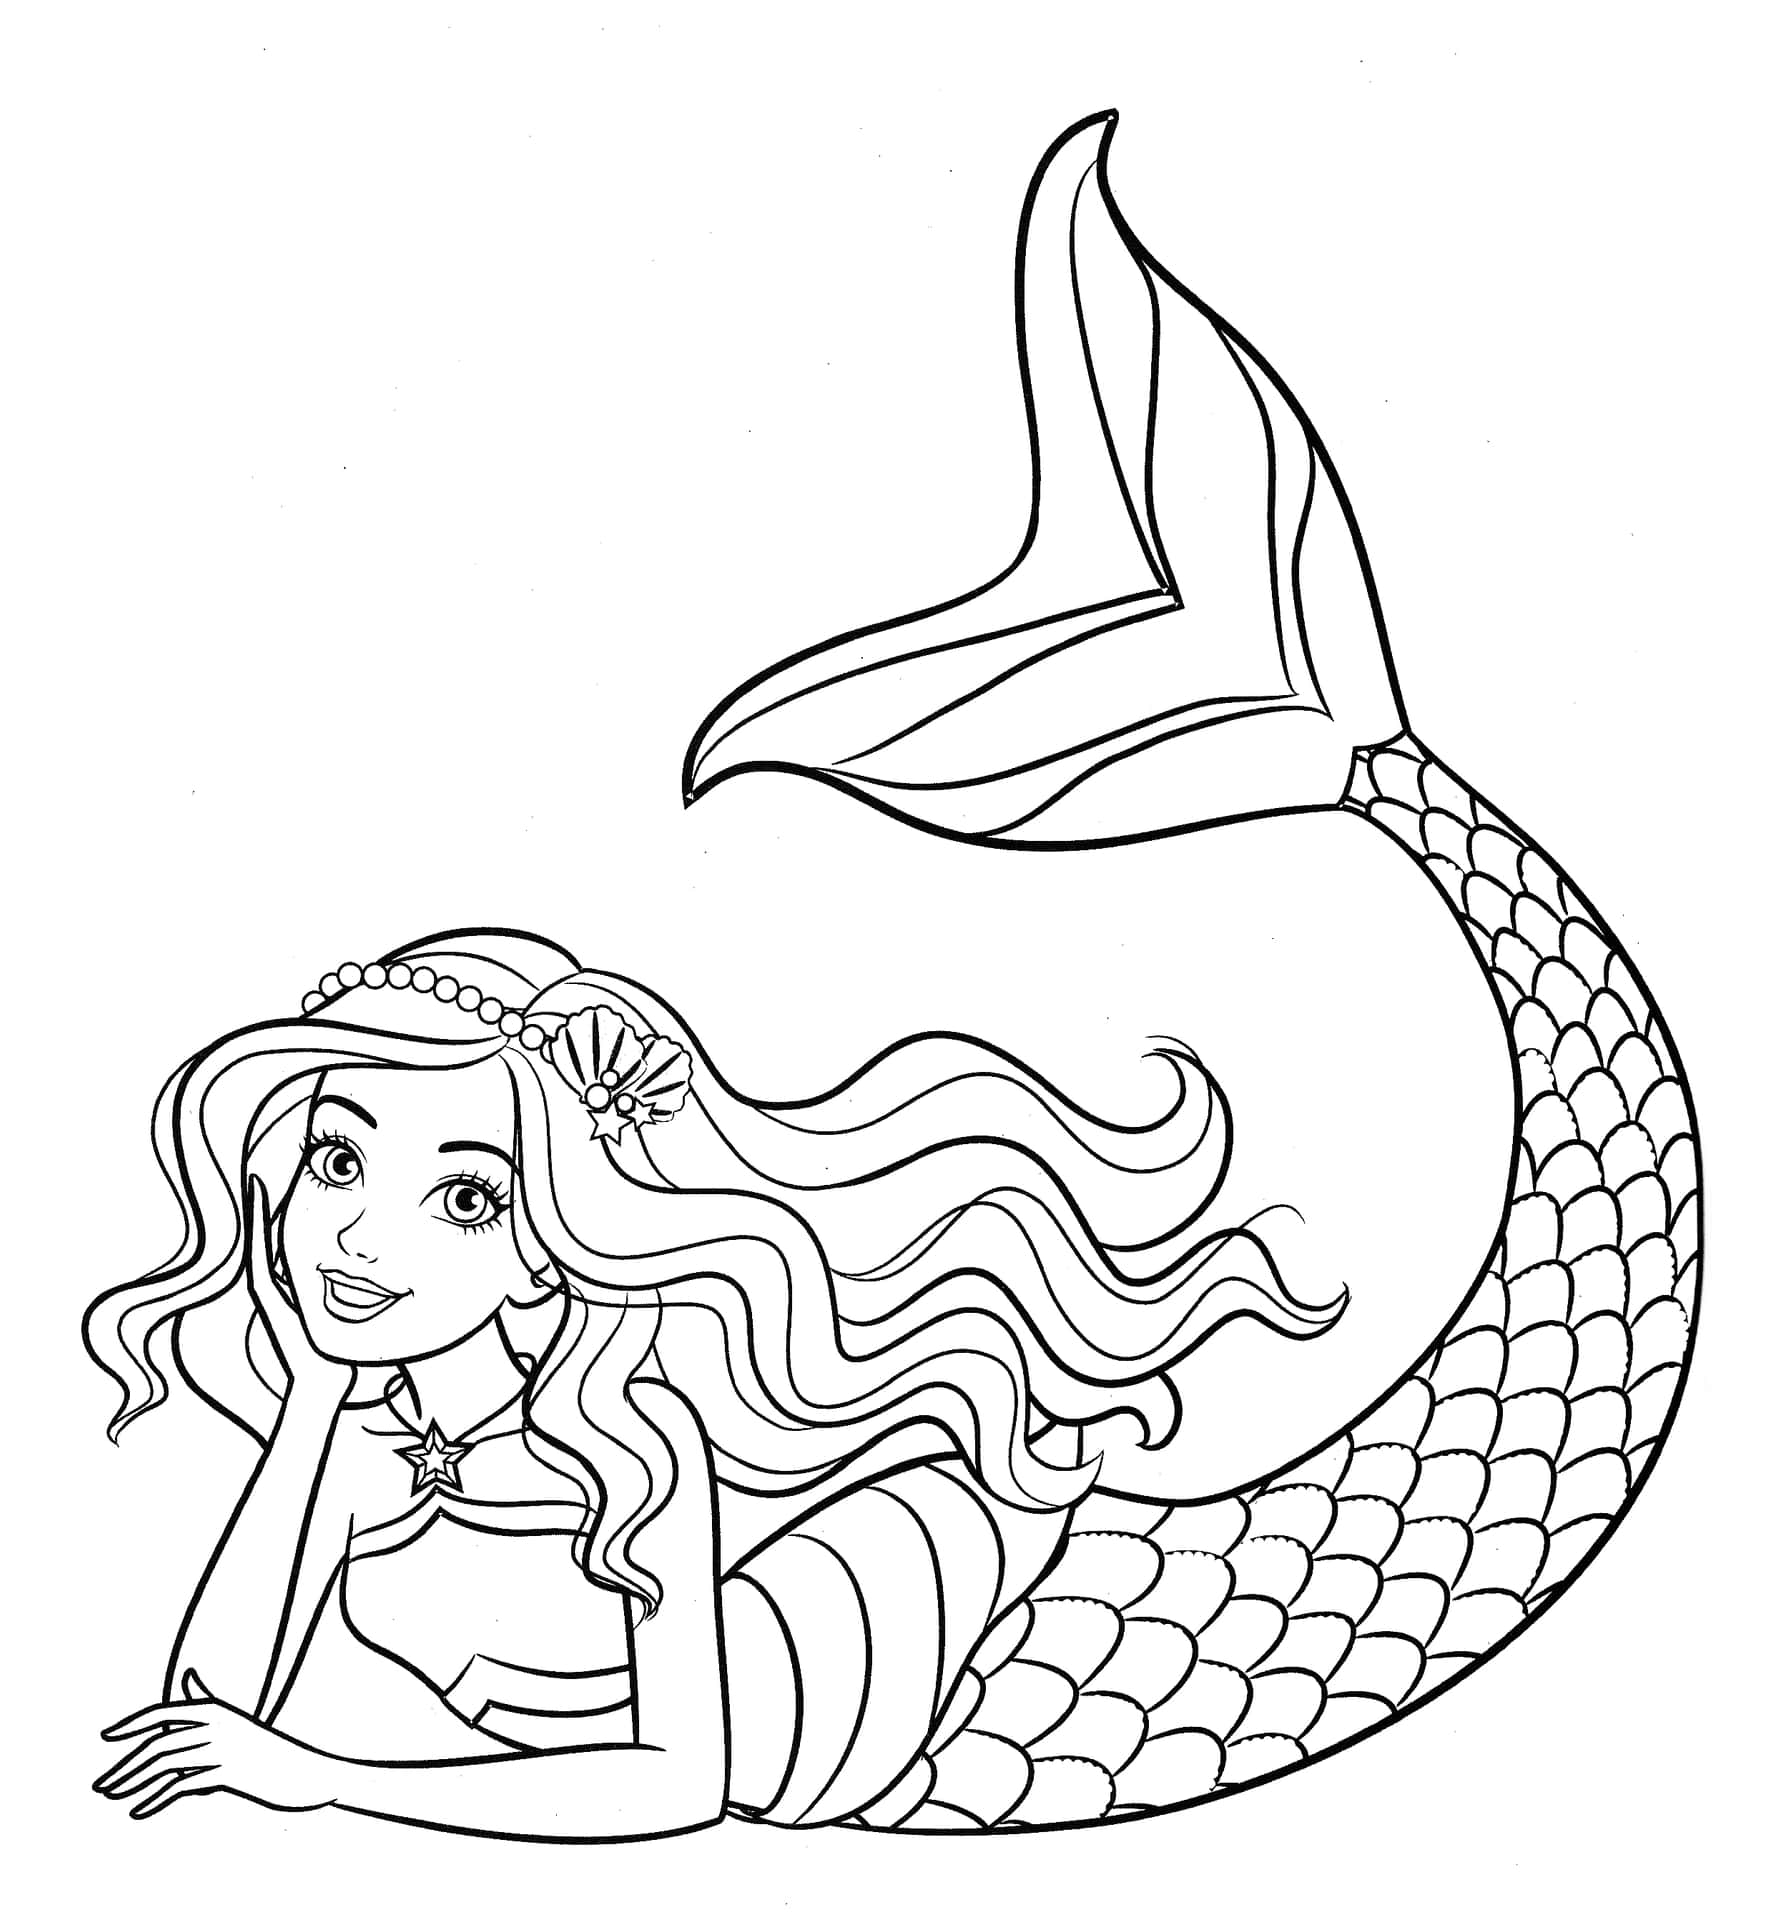 barbie a mermaid tale 2 coloring pages